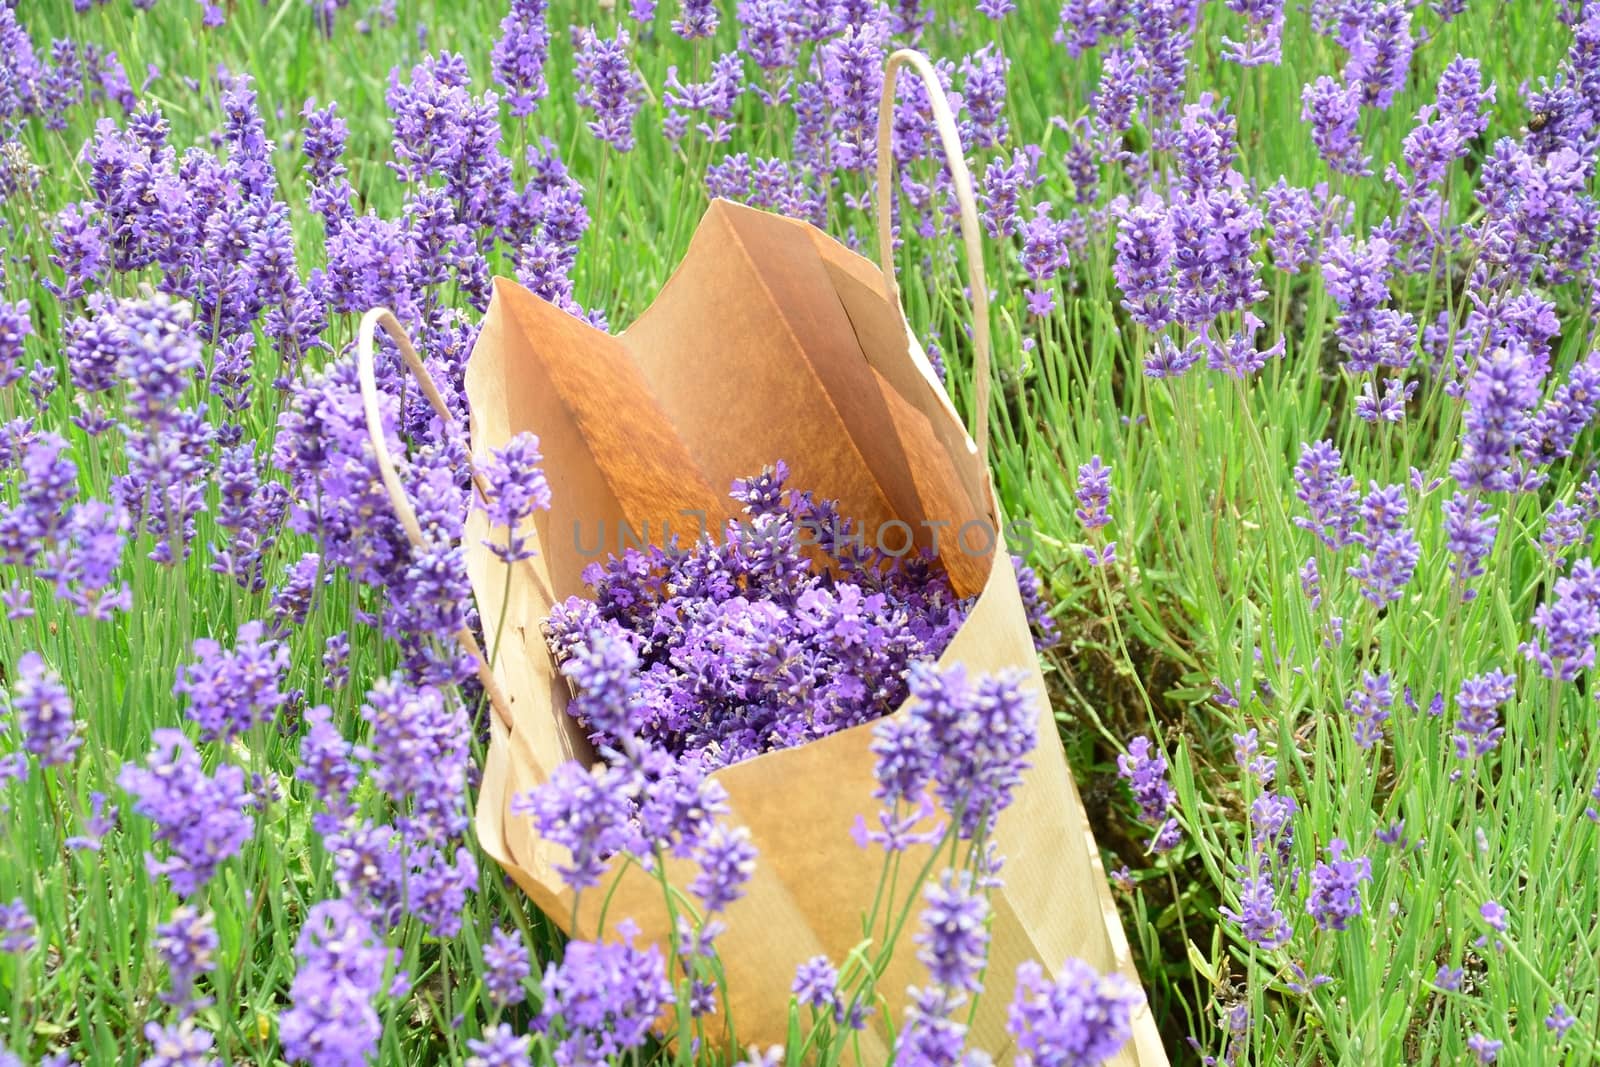 Hand picked Lavender in paper bag